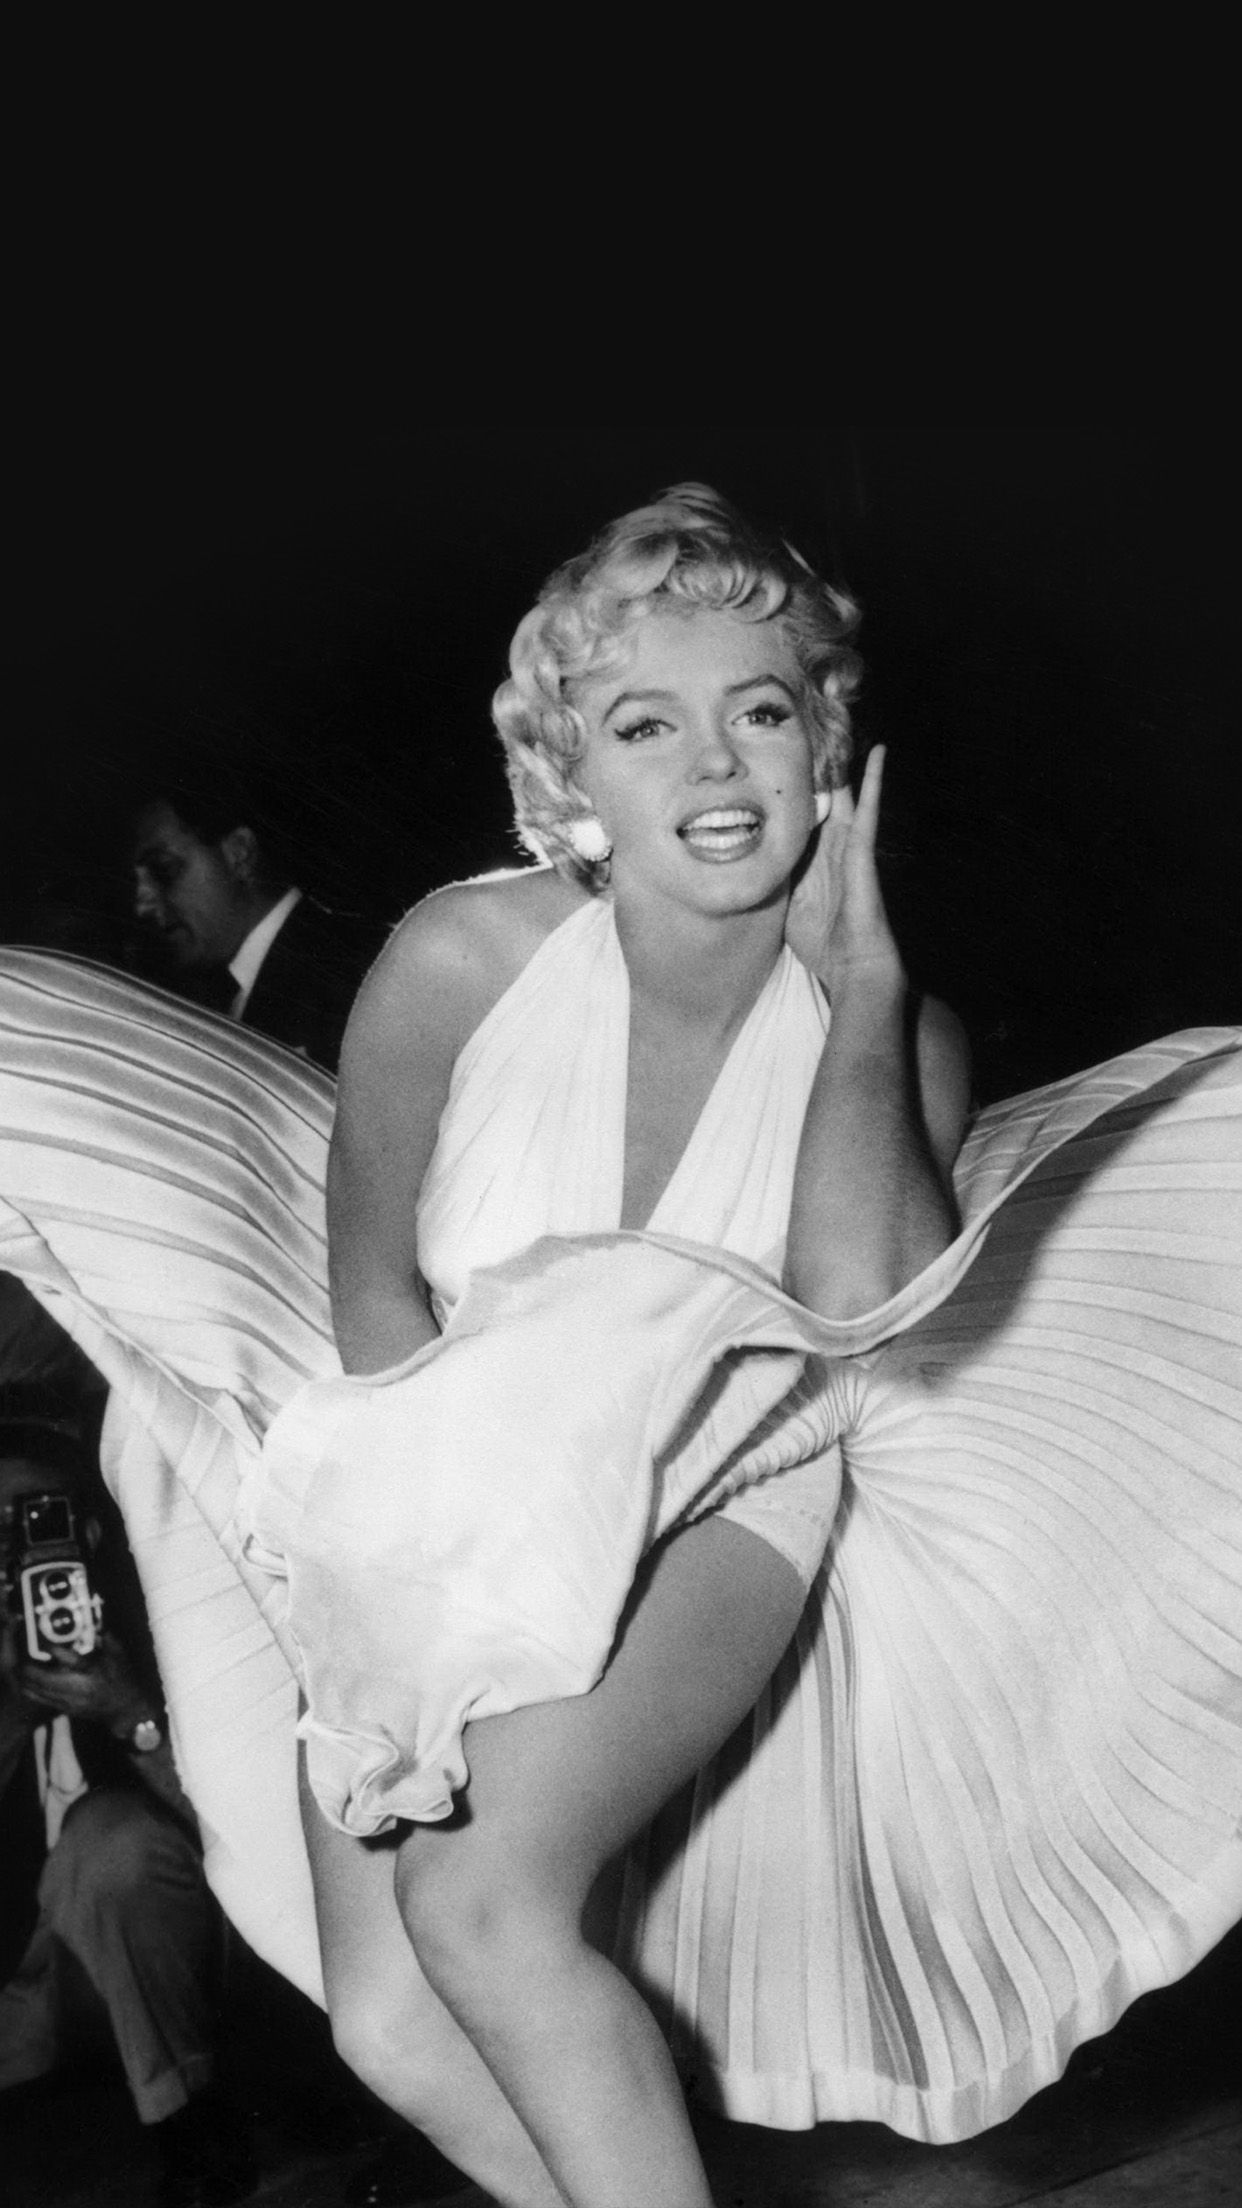 Marilyn Monroe in the iconic white dress from the movie The Seven Year Itch. - Marilyn Monroe